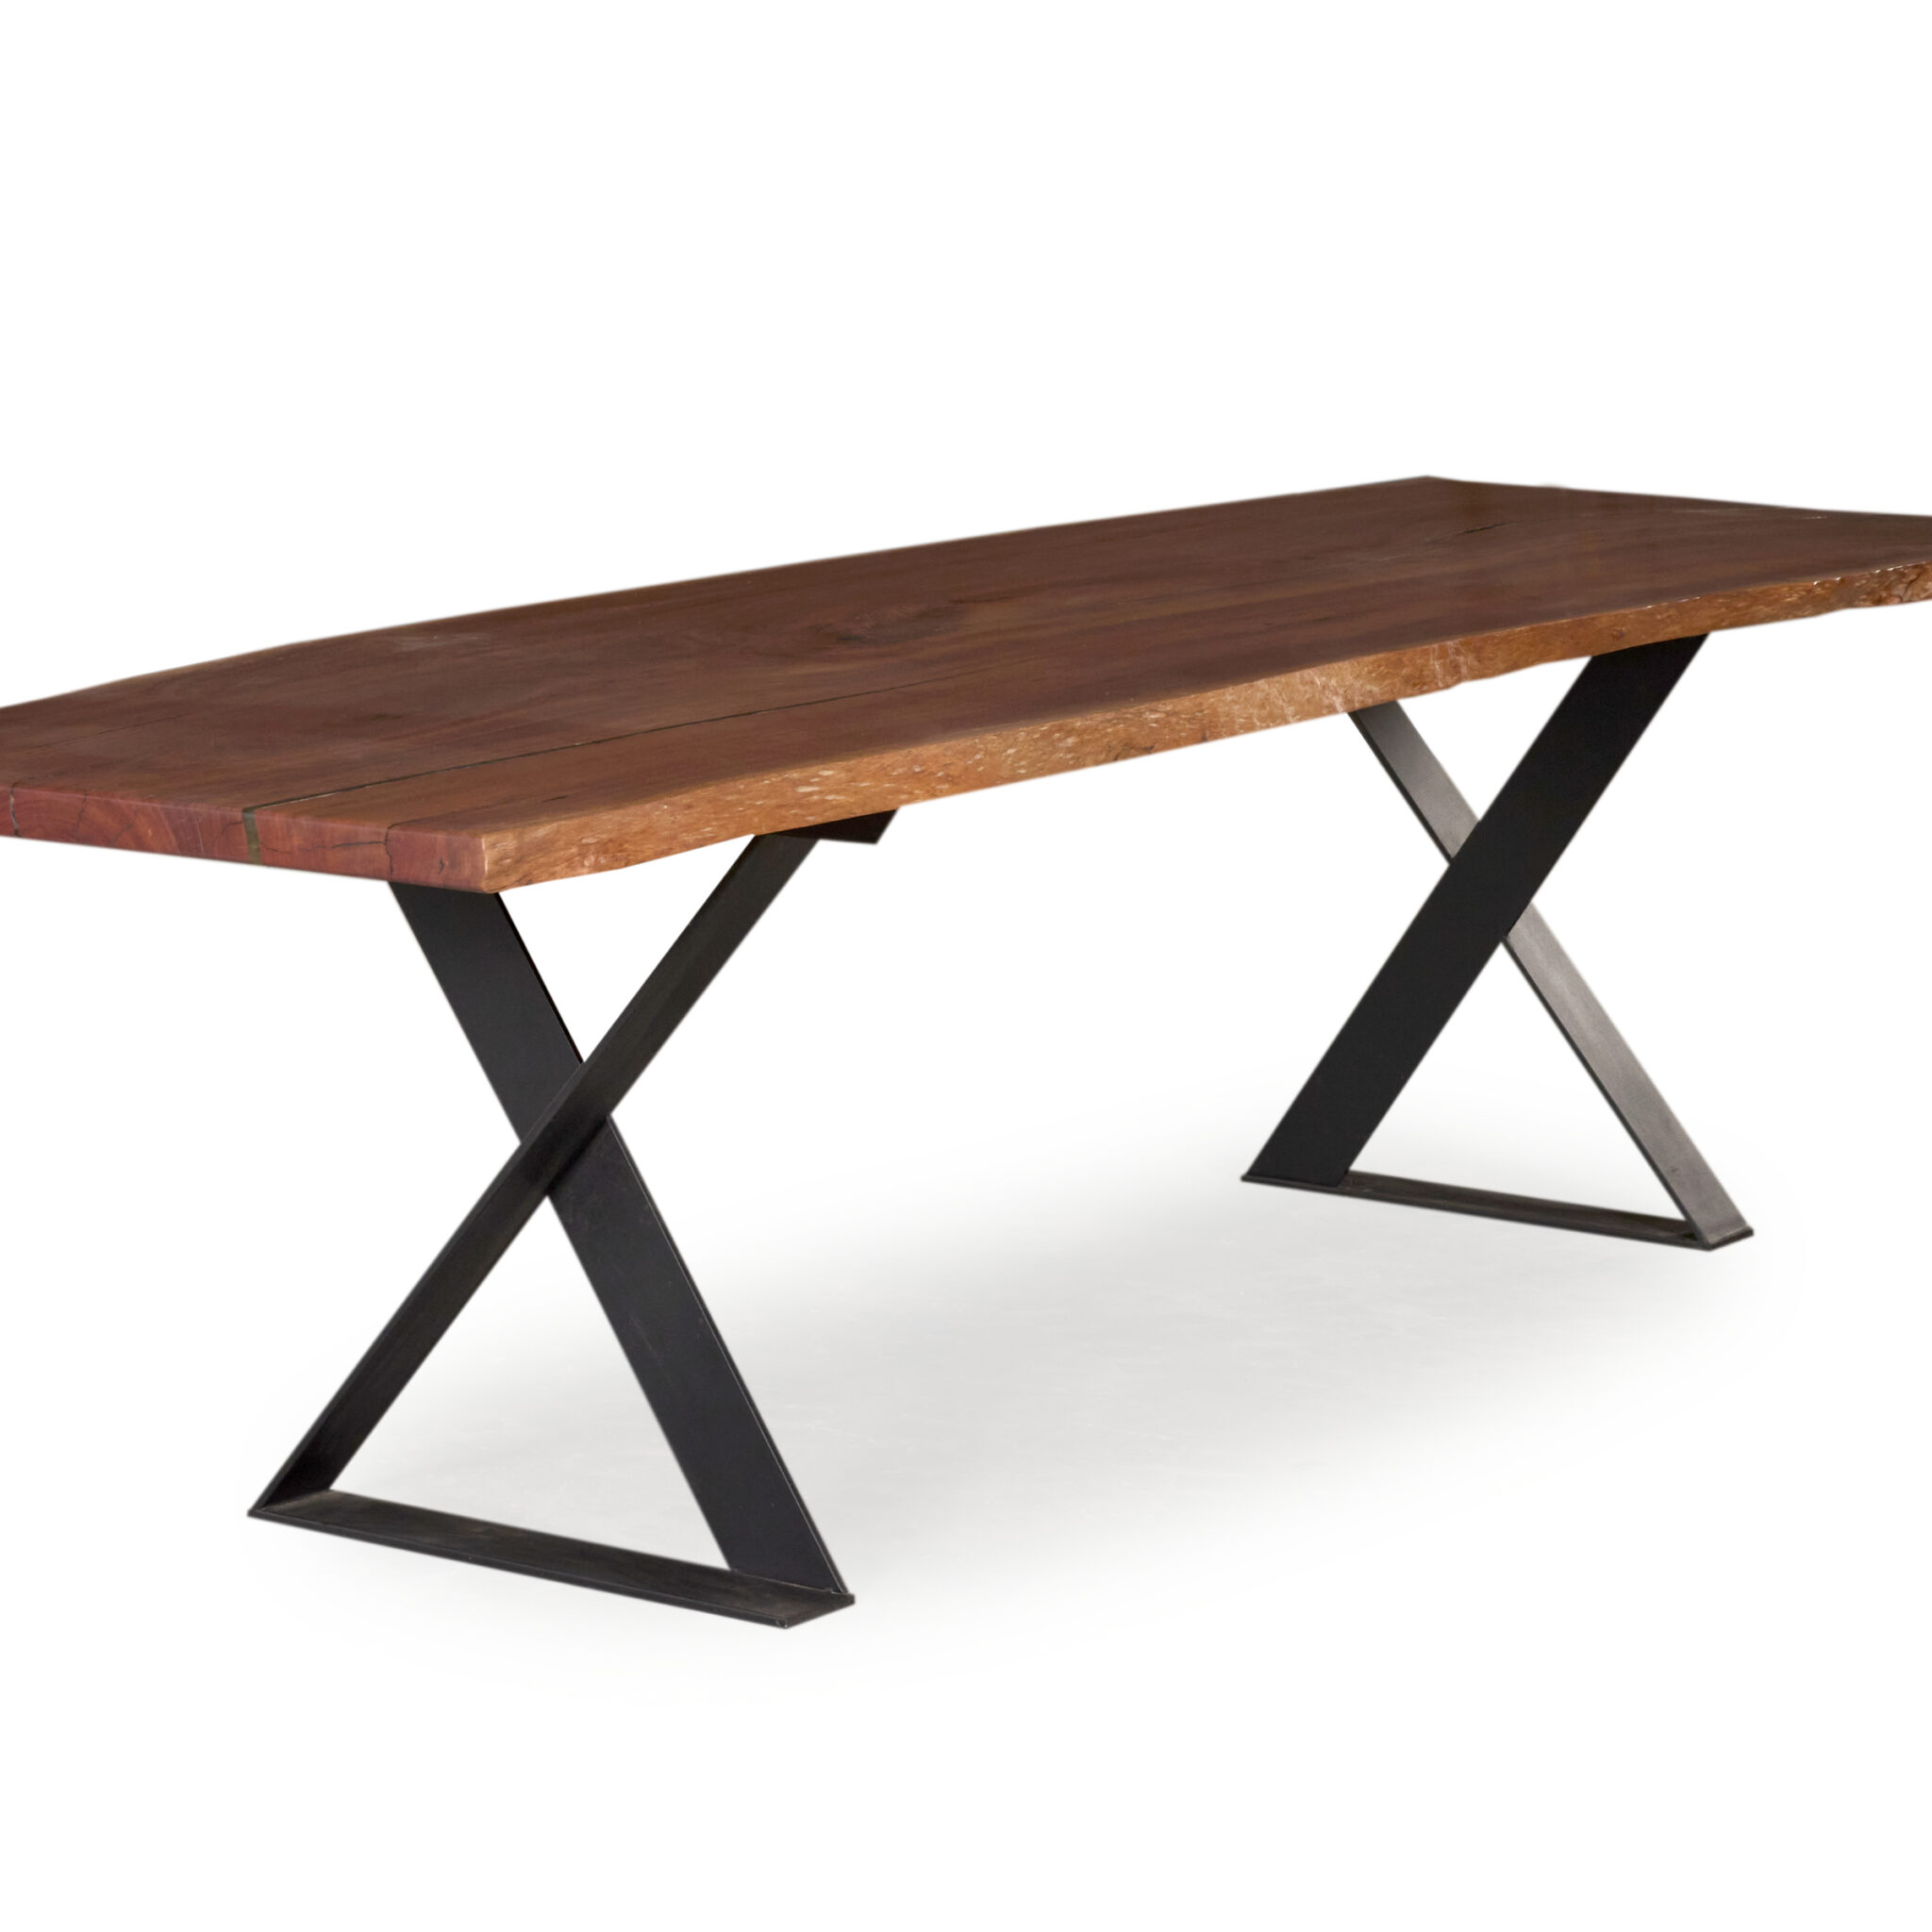 Vaucluse Dining Table: Redgum timber with sleek X leg steel black base and natural edge.